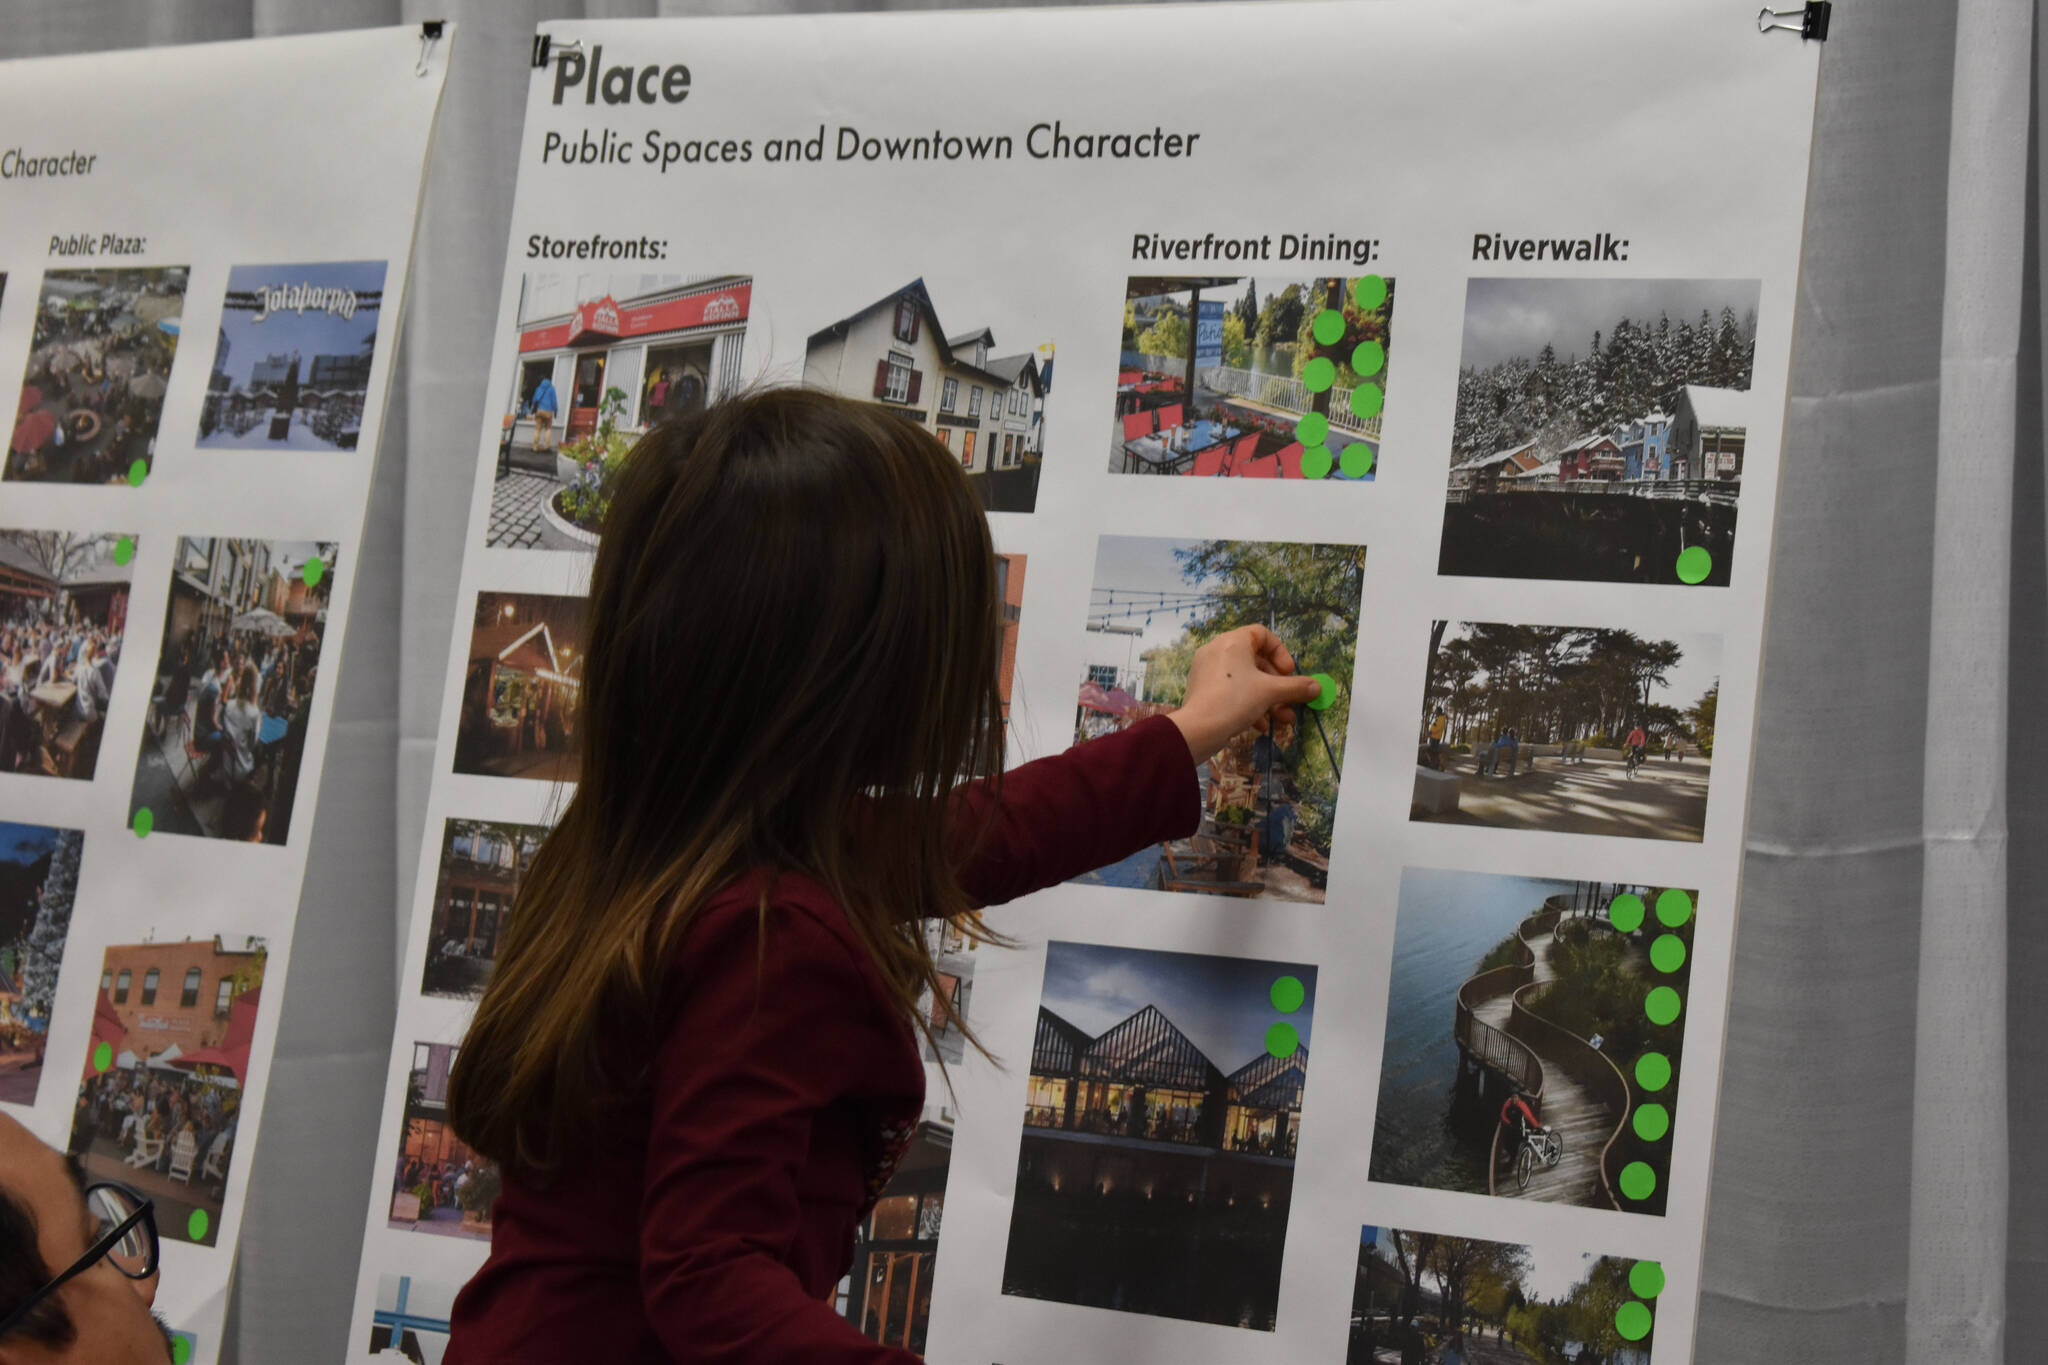 A young girl is lifted to place a sticker indicating her preference on a concept board on Thursday, Jan. 12, 2023, at the Soldotna Riverfront Redevelopment Open House at the Soldotna Regional Sports Complex in Soldotna, Alaska. (Jake Dye/Peninsula Clarion)